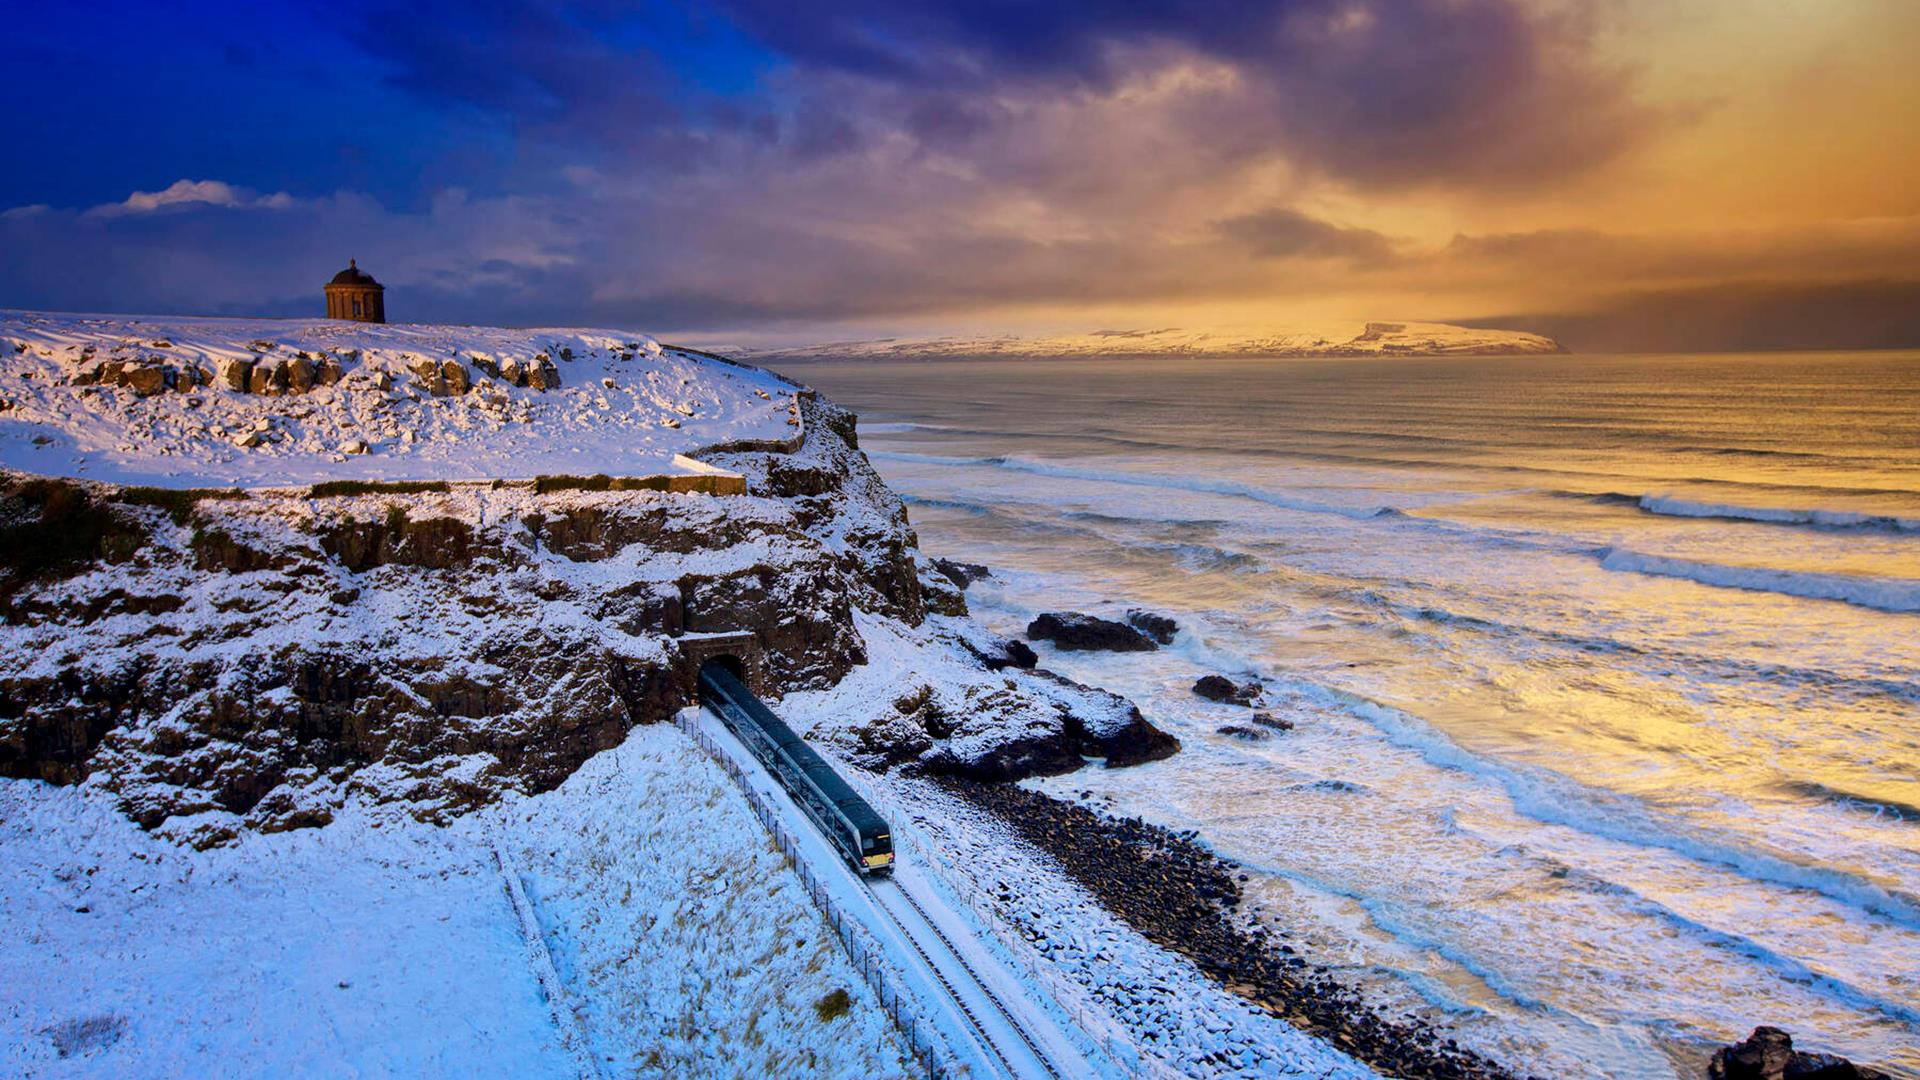 Snowy scene at Mussenden Temple with a train in the foreground